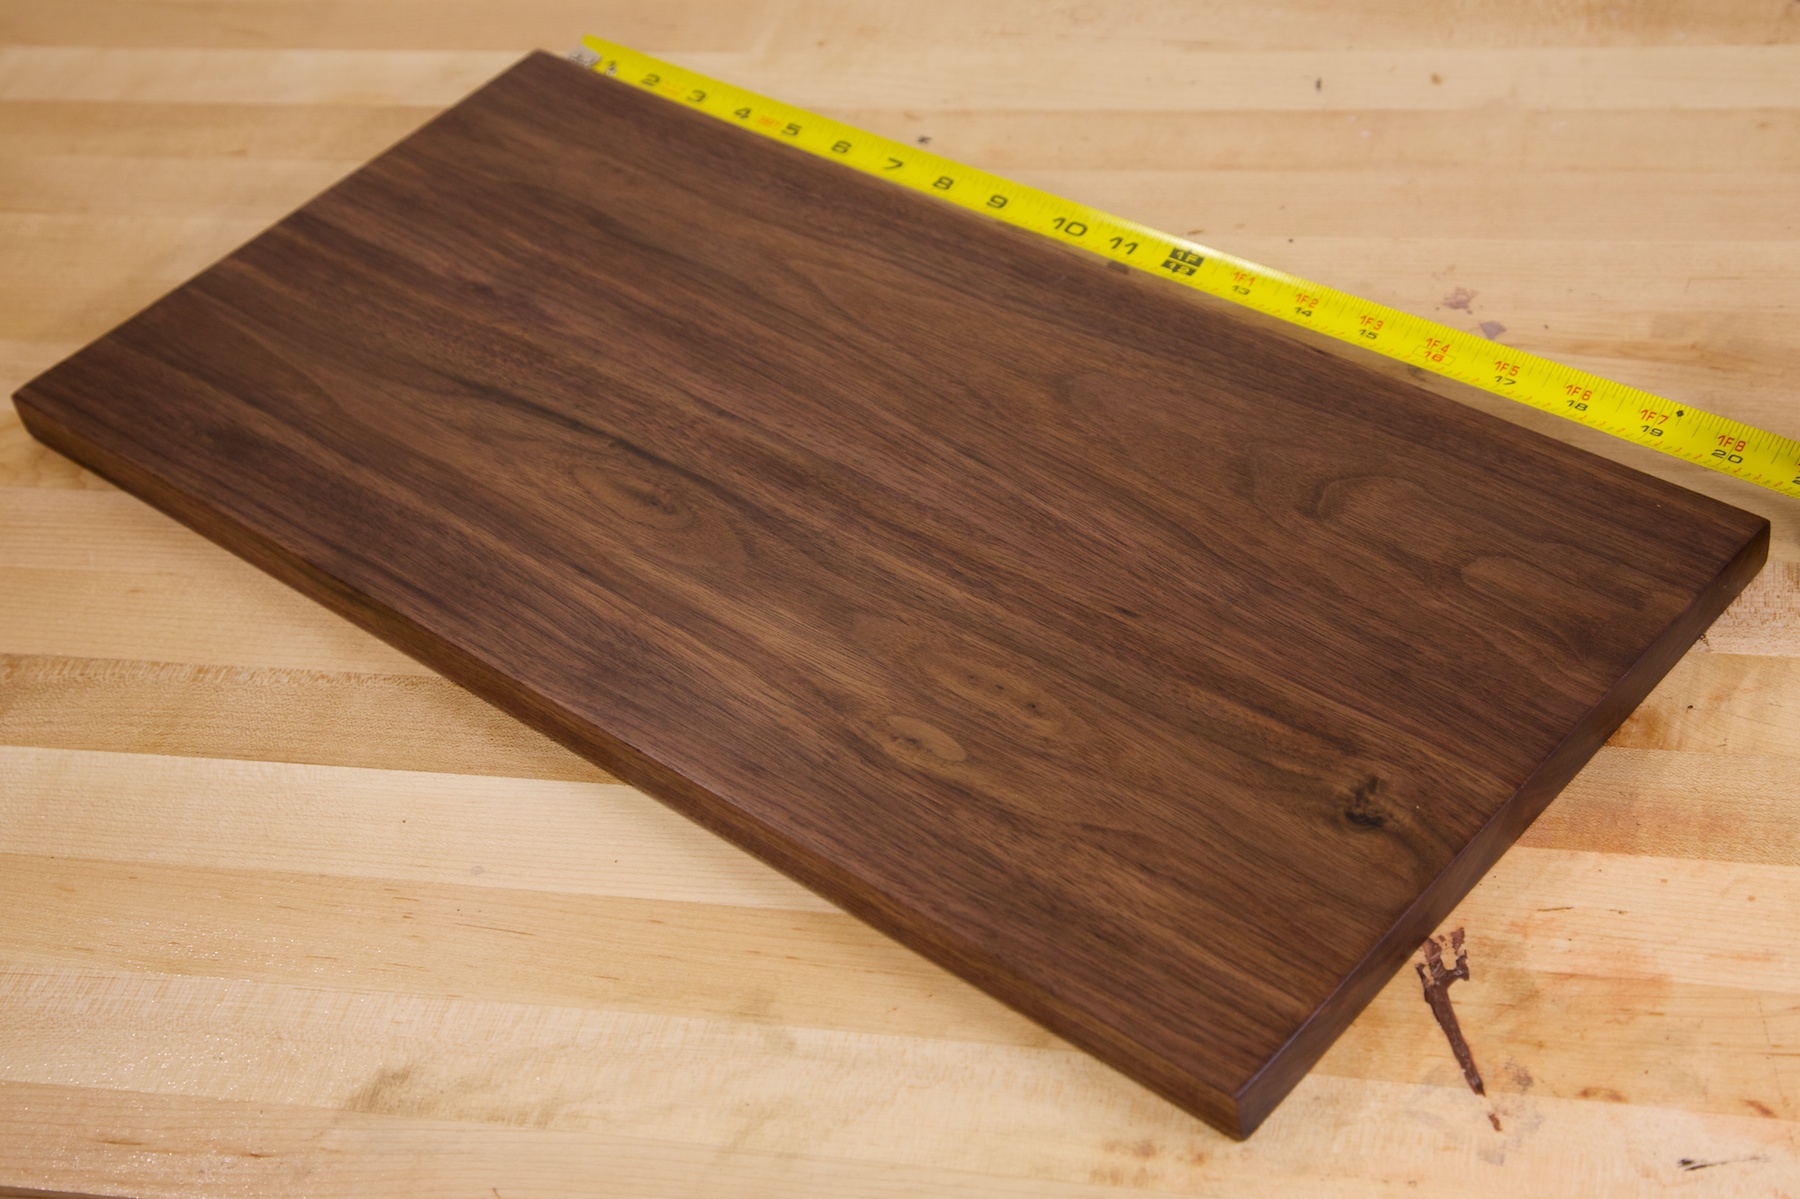 3 Tricks For A Beautiful Walnut Wood Finish Woodworkers Source Blog